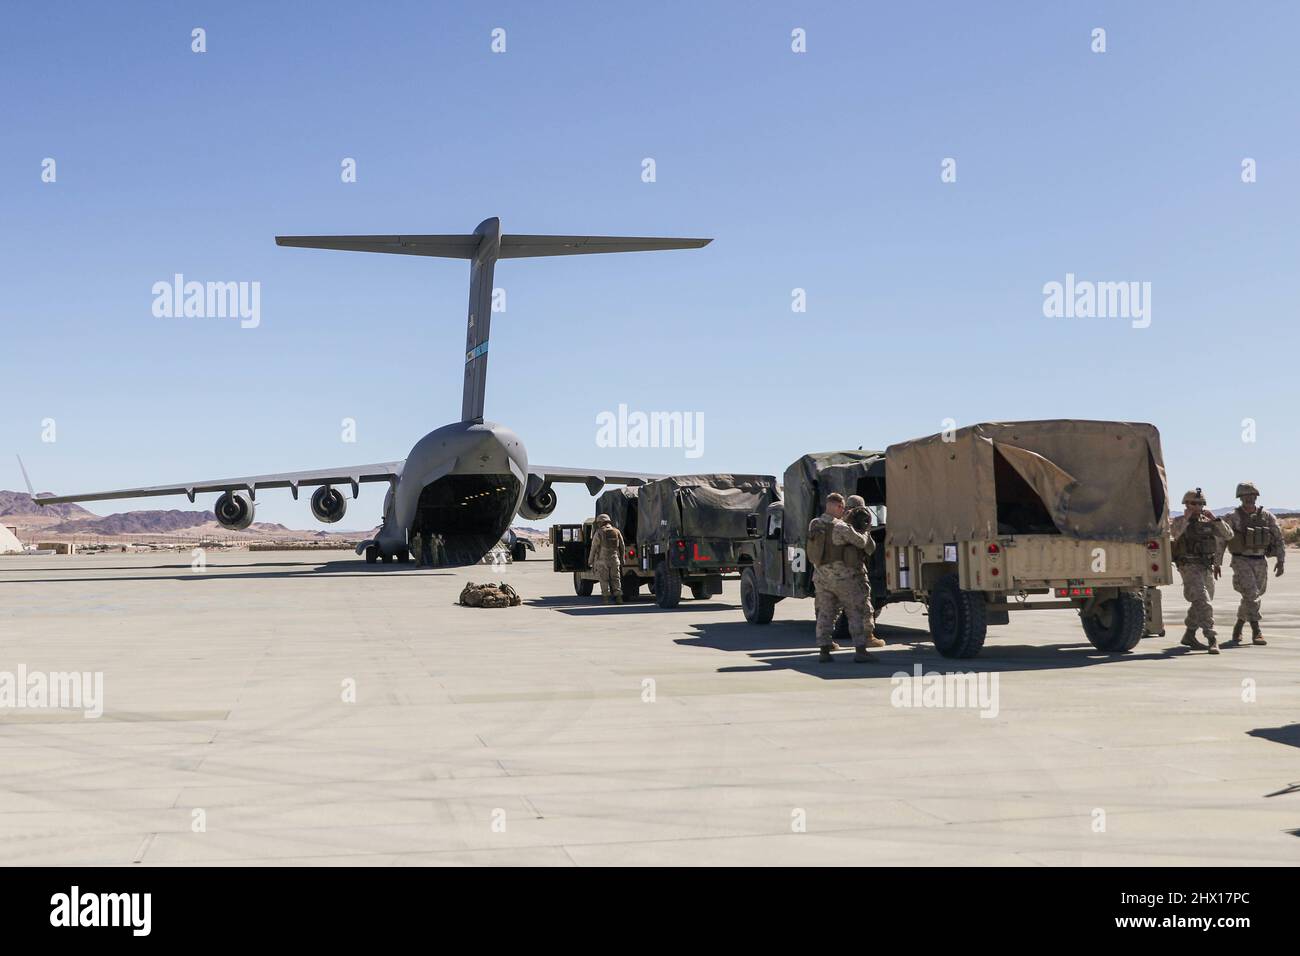 U.S. Marines with 7th Marine Regiment, 1st Marine Division, stage tactical vehicles in preparation to board a C-17 Globemaster III assigned to 3rd Airlift Squadron, Dover Air Force Base, Delaware, during a command post exercise (CPX) at Marine Corps Air Ground Combat Center Twentynine Palms, California, March 1, 2022. This evolution provided an opportunity for Marines to practice expedient setup of a regimental headquarters, enabling command and control from distributed locations. (U.S. Marine Corps photo by Sgt. Jailine L. AliceaSantiago) Stock Photo